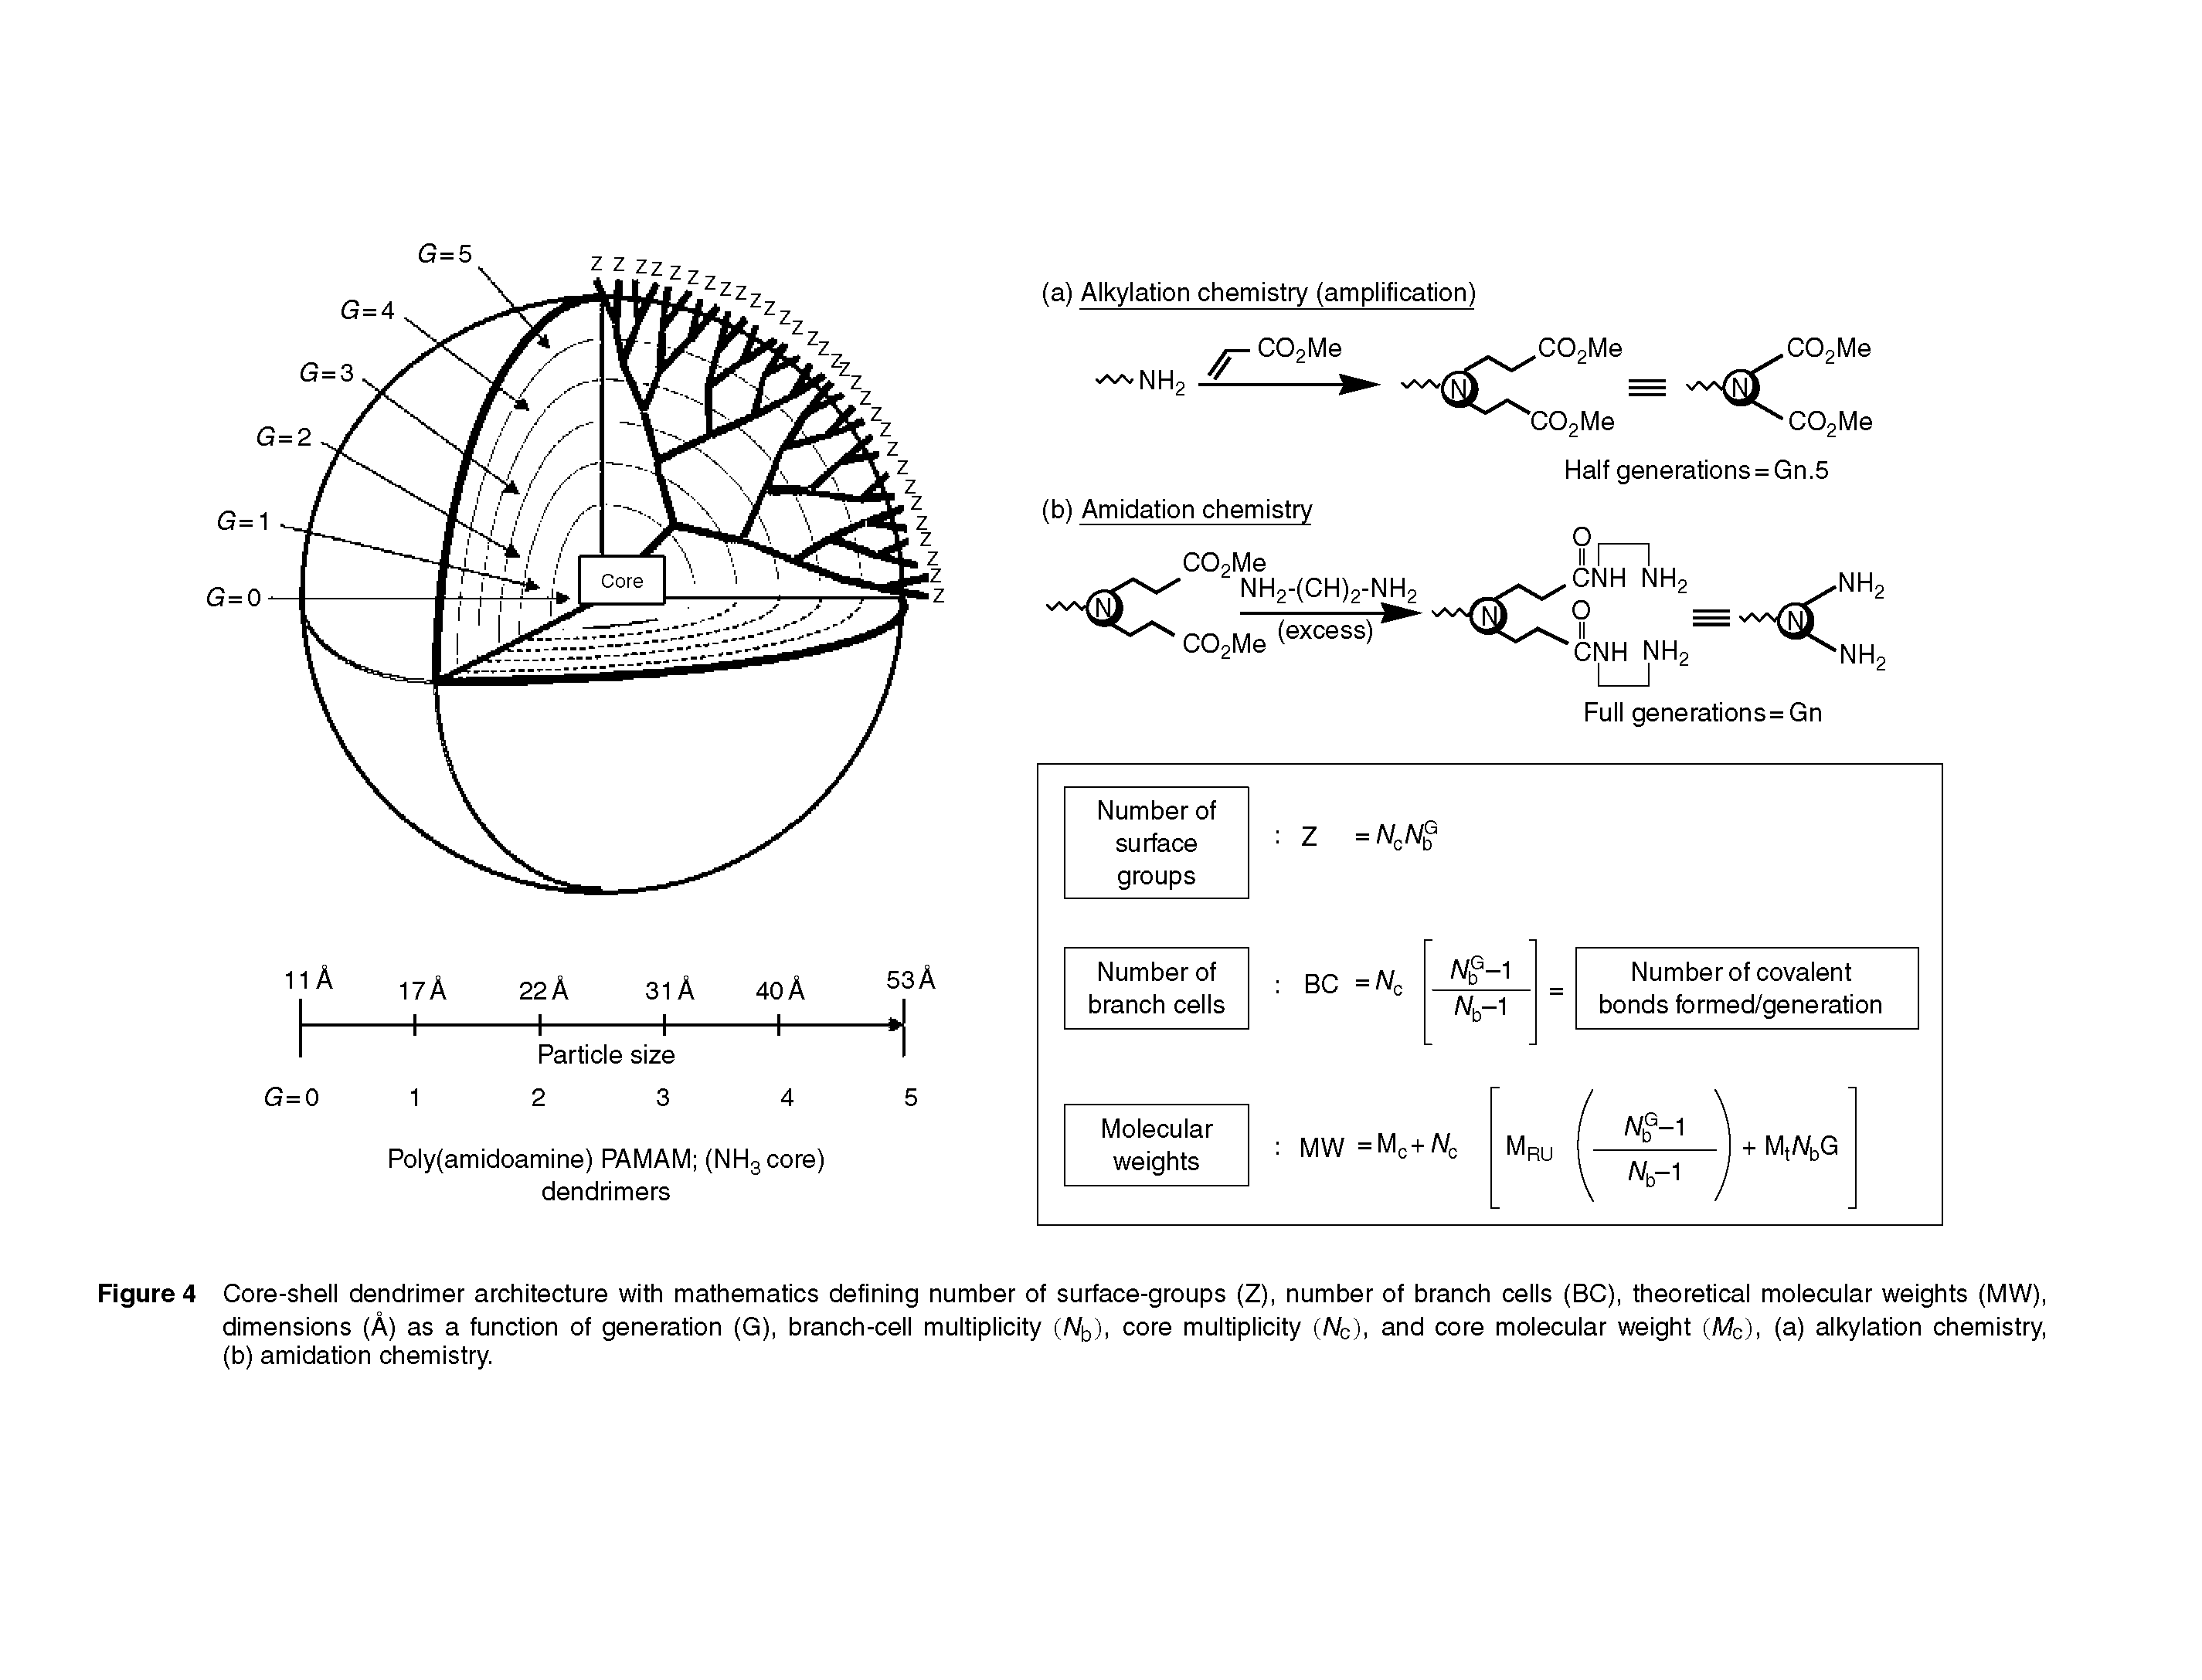 Figure 4 Core-shell dendrimer architecture with mathematics defining number of surface-groups (Z), number of branch cells (BC), theoretical molecular weights (MW), dimensions (A) as a function of generation (G), branch-cell multiplicity (A/ ), core multiplicity (Afc), and core molecular weight (Me), (a) alkylation chemistry, (b) amidation chemistry.